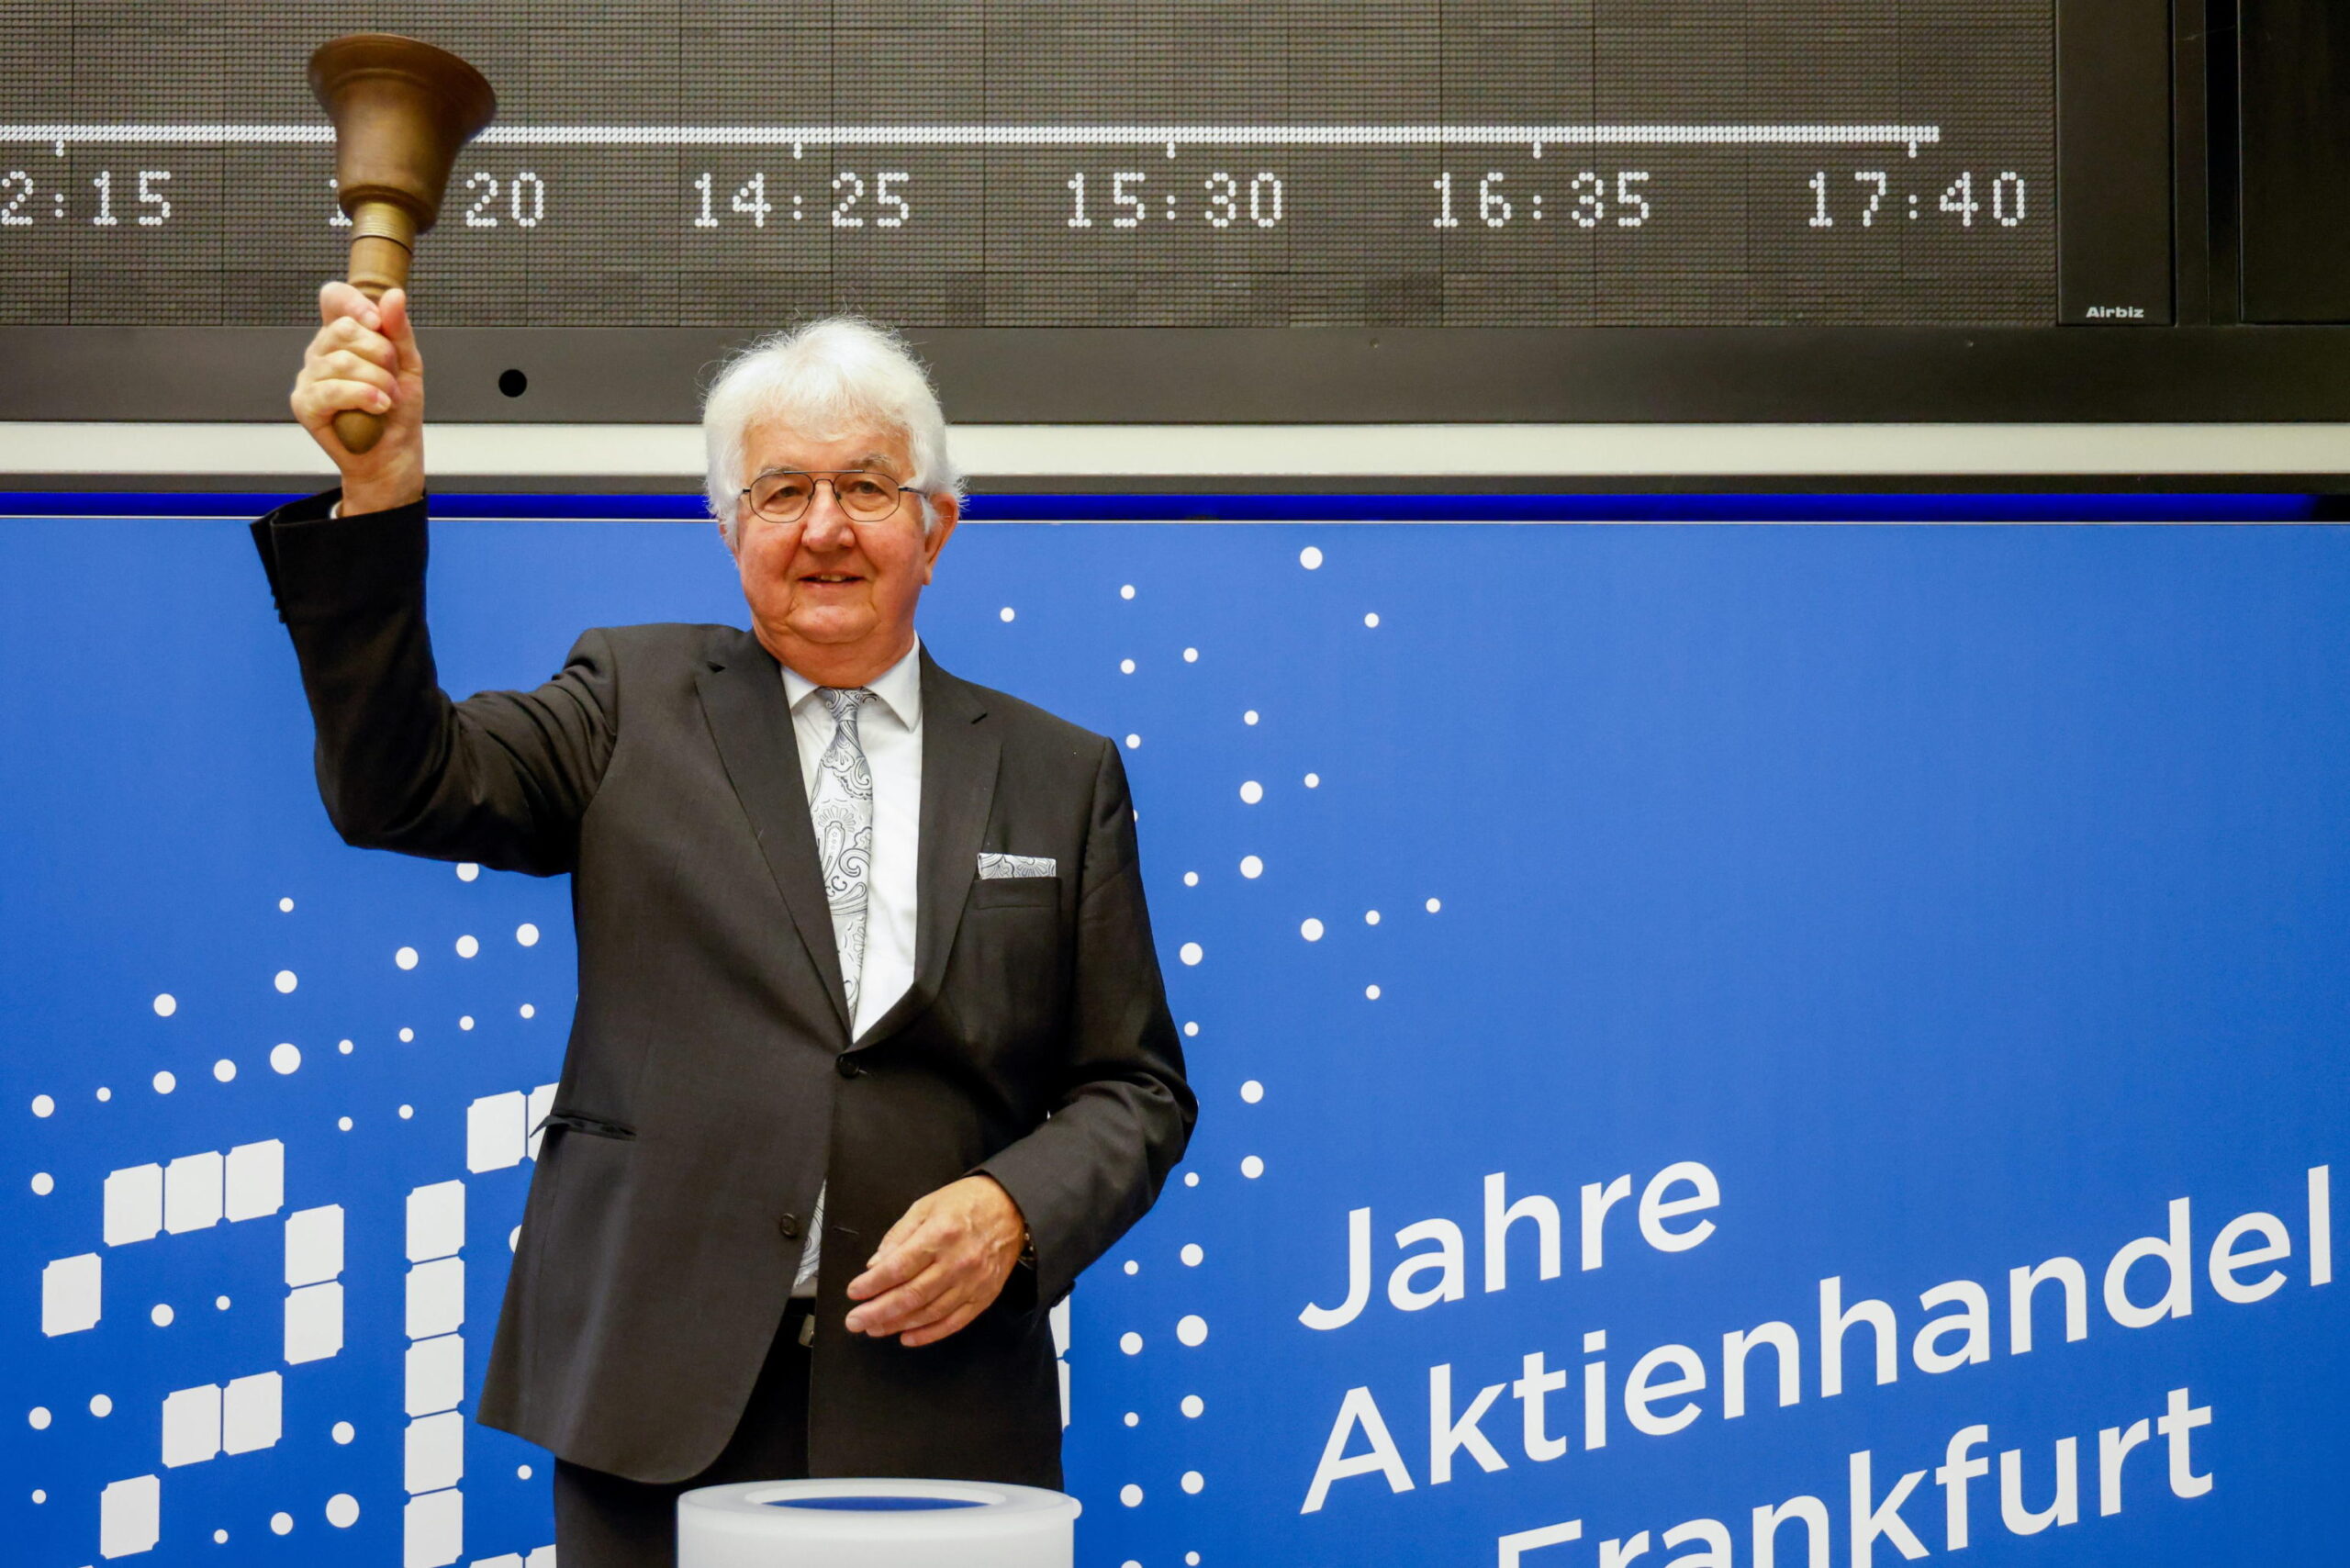 epa08656047 The Governor of the Austrian National Bank Robert Holzmann rings the Opening Bell on the trading floor at the Frankfurt Stock Exchange during the celebration of 200 years of stock trading in Frankfurt, Germany, 09 September 2020. The share of Austrian National Bank was first tradable share in Frankfurt in 1820.  EPA/JOERG HALISCH